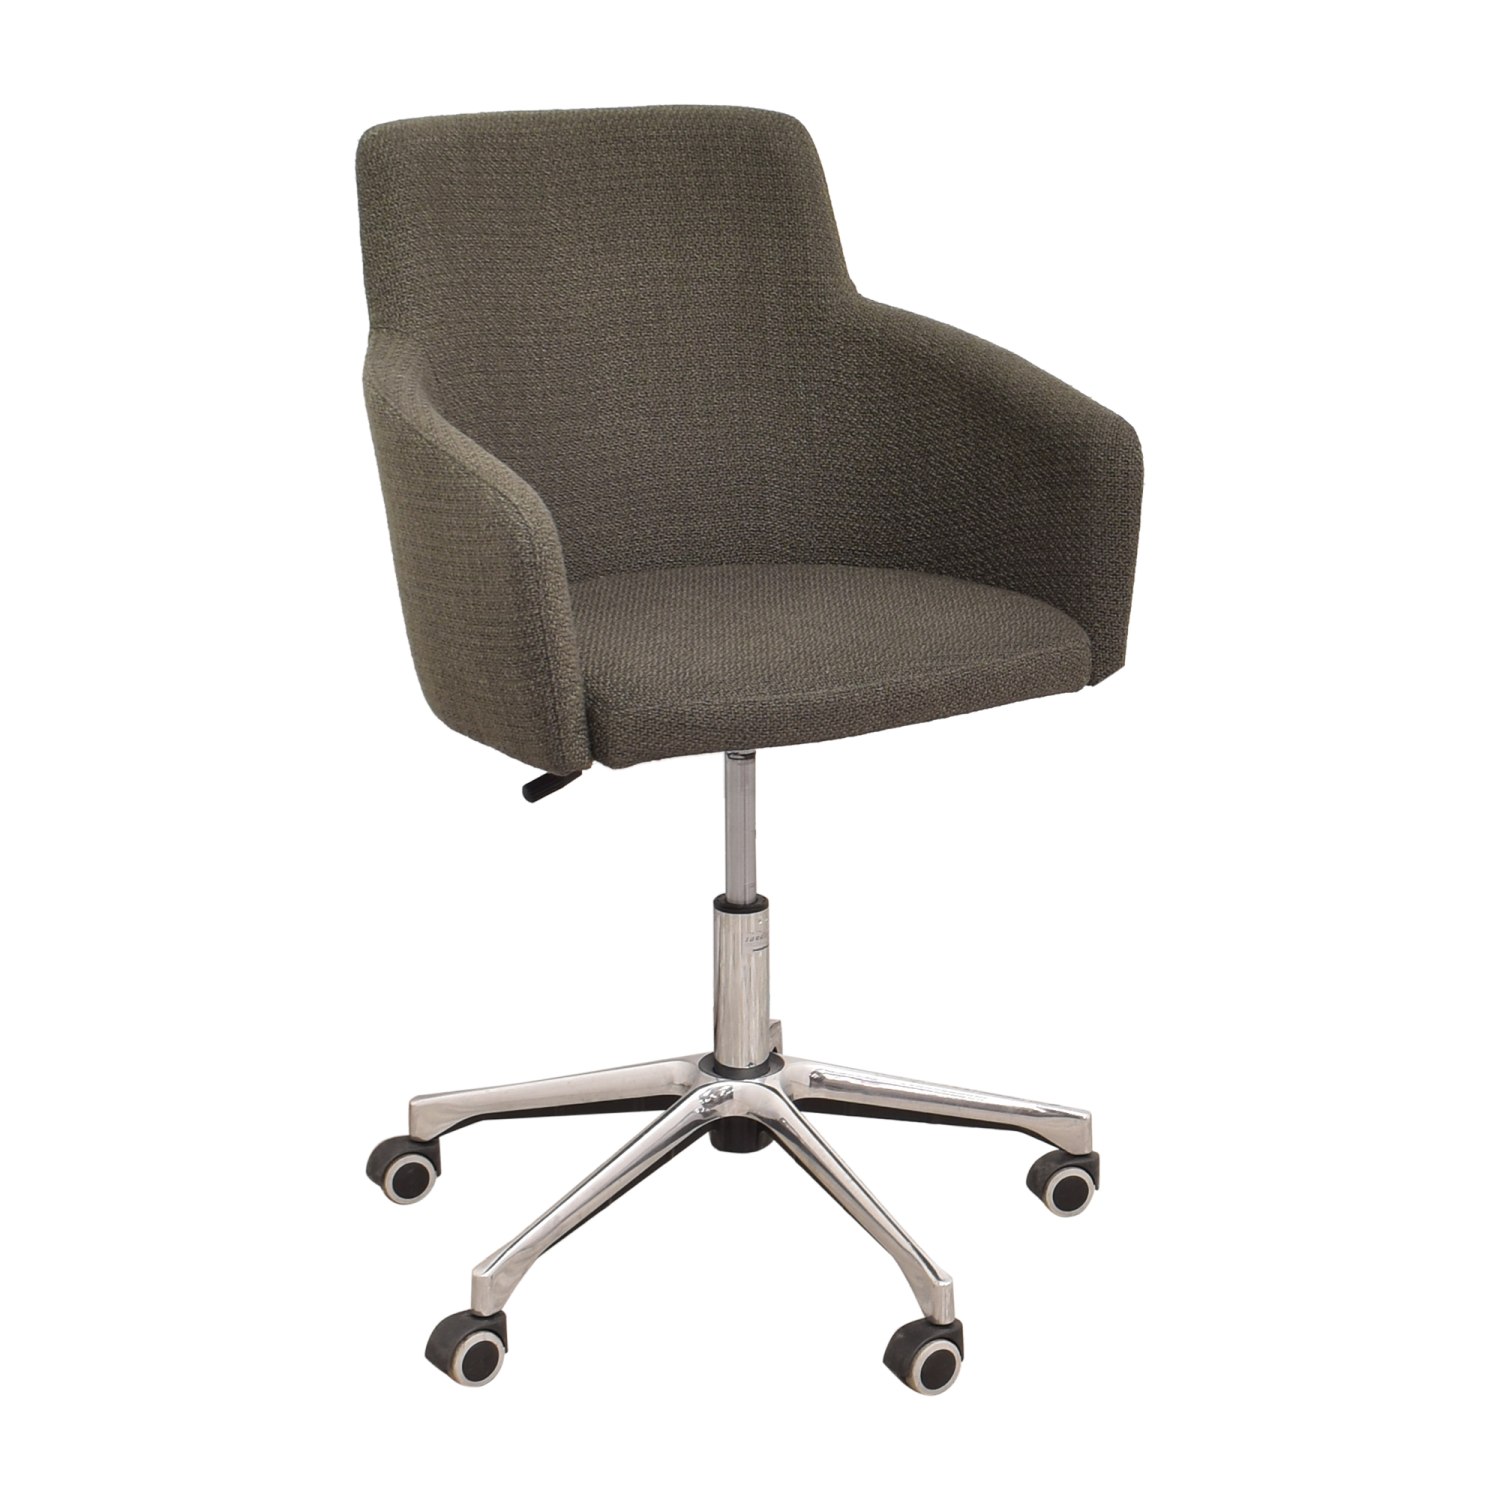 buy Metalmobil Marka 2.6 Office Chair Metalmobil Chairs